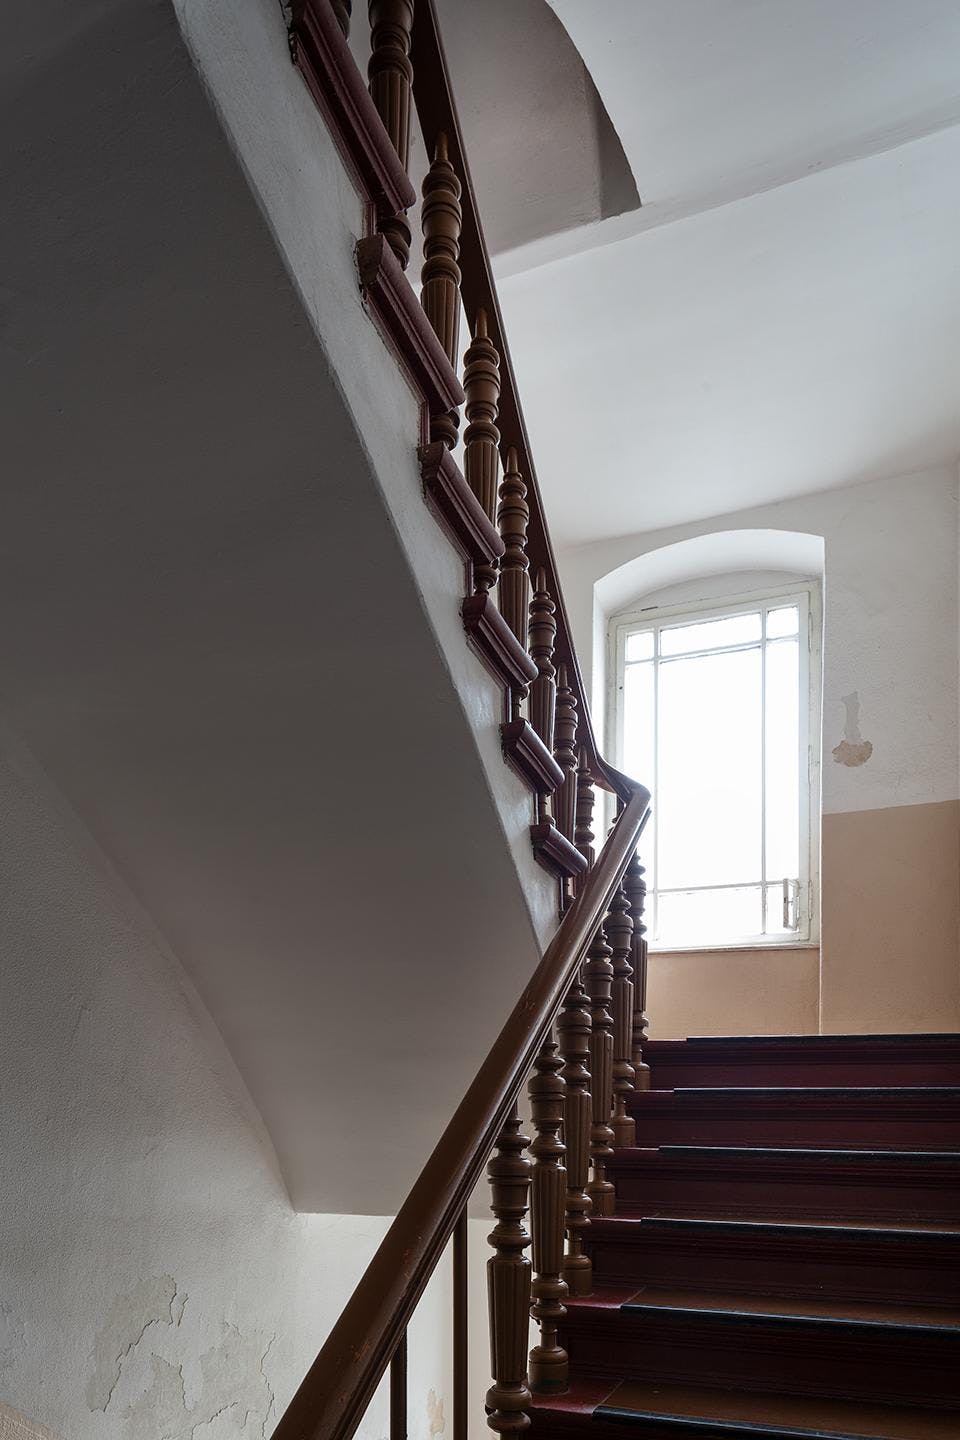 The image features a staircase with a black railing, leading up to a window. The staircase is situated in a hallway, and the window is located above the stairs. The staircase appears to be in a dark room, possibly a basement or a dark hallway. The presence of the window above the stairs suggests that the room could be a living space or a bedroom.